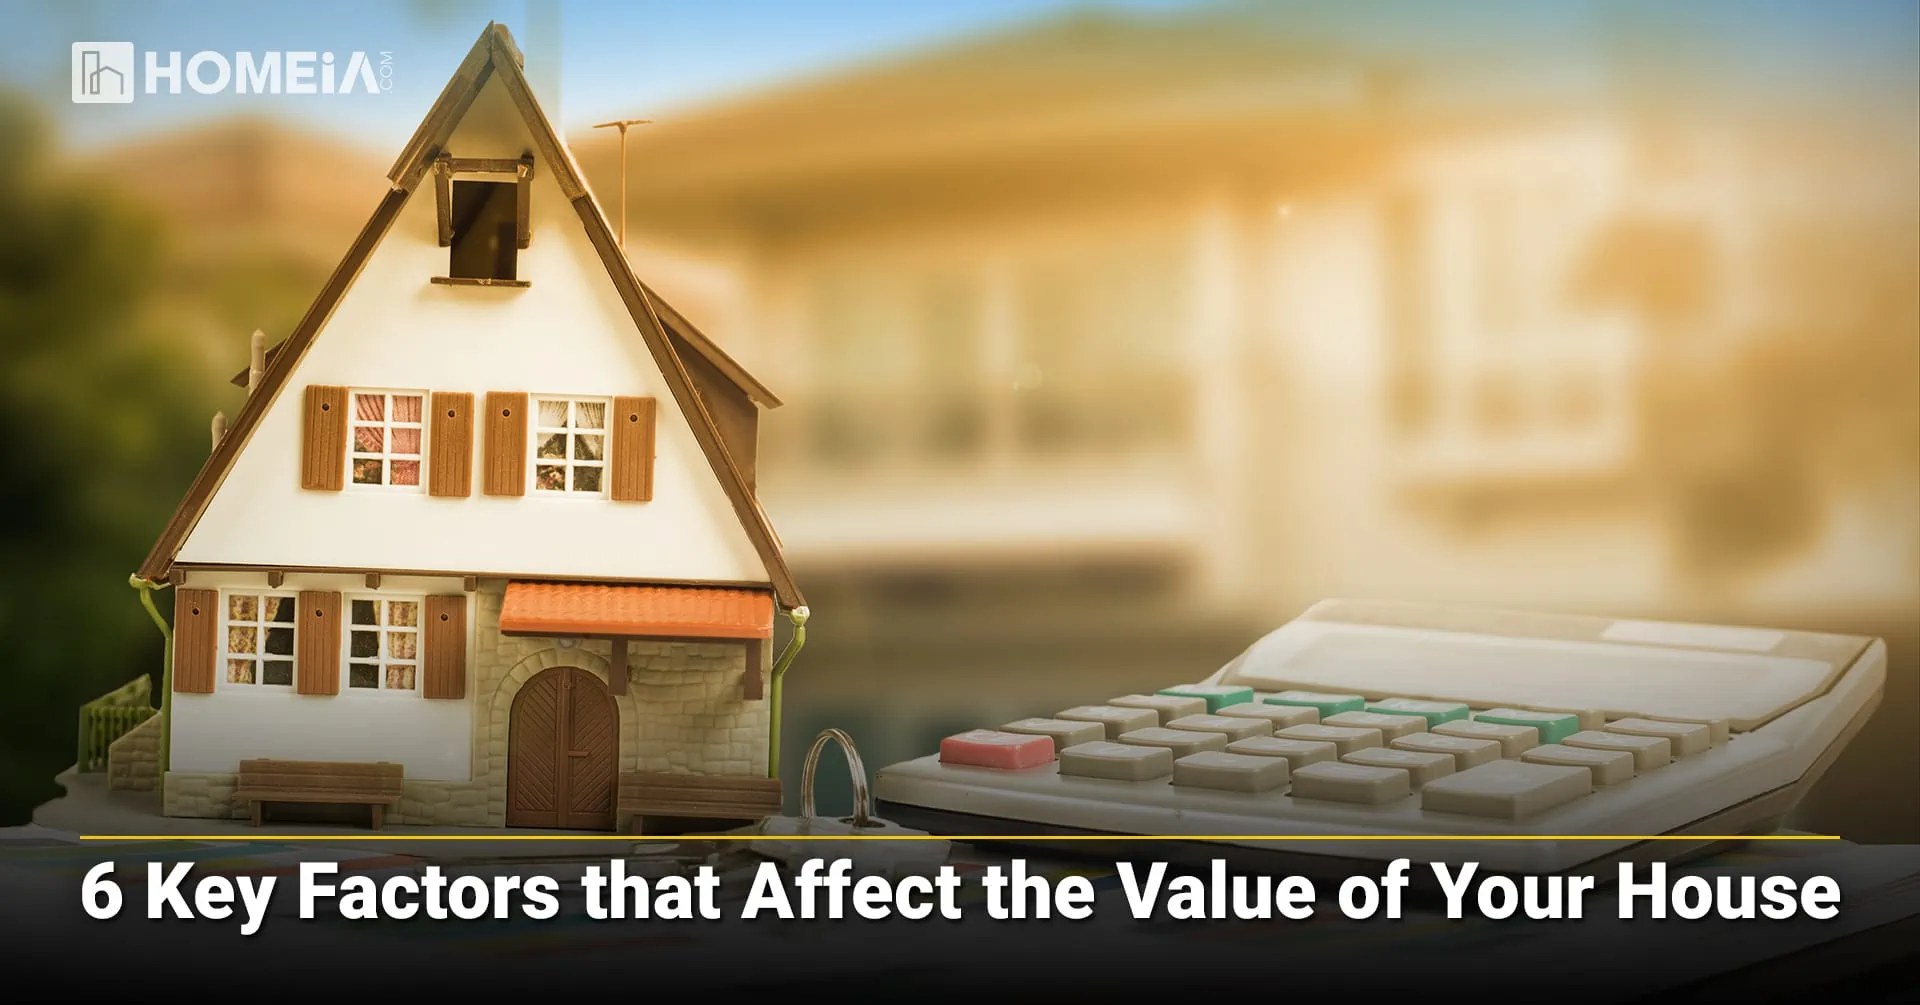 6 Key Factors that Affect the Value of Your House